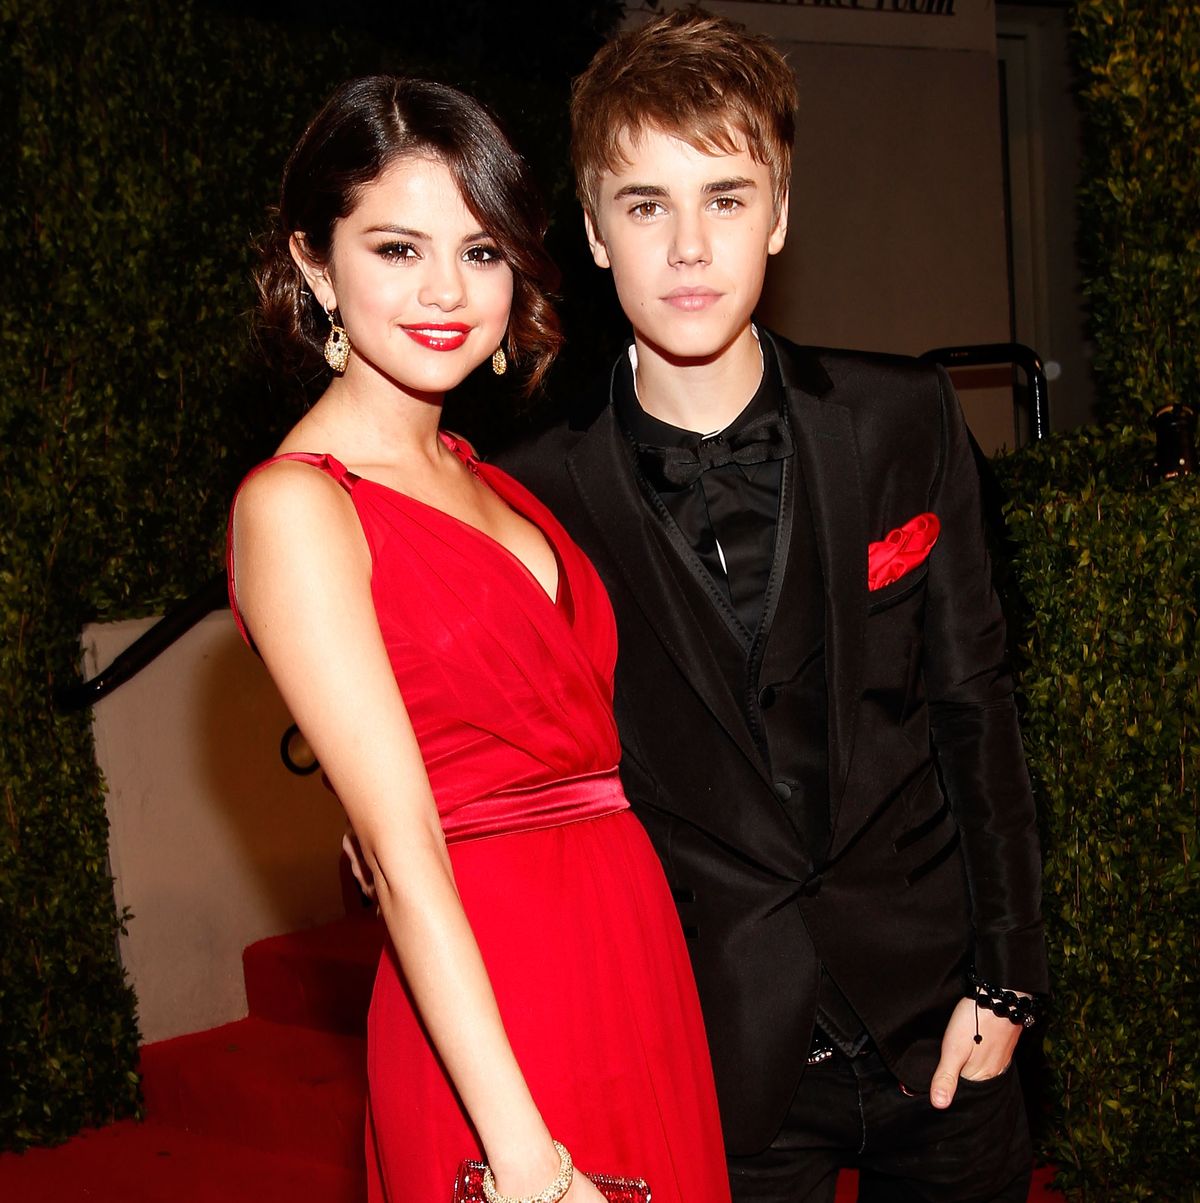 west hollywood, ca   february 27  actress selena gomez and musician justin bieber attend the 2011 vanity fair oscar party hosted by graydon carter at the sunset tower hotel on february 27, 2011 in west hollywood, california  photo by christopher polkvf11getty images for vanity fair